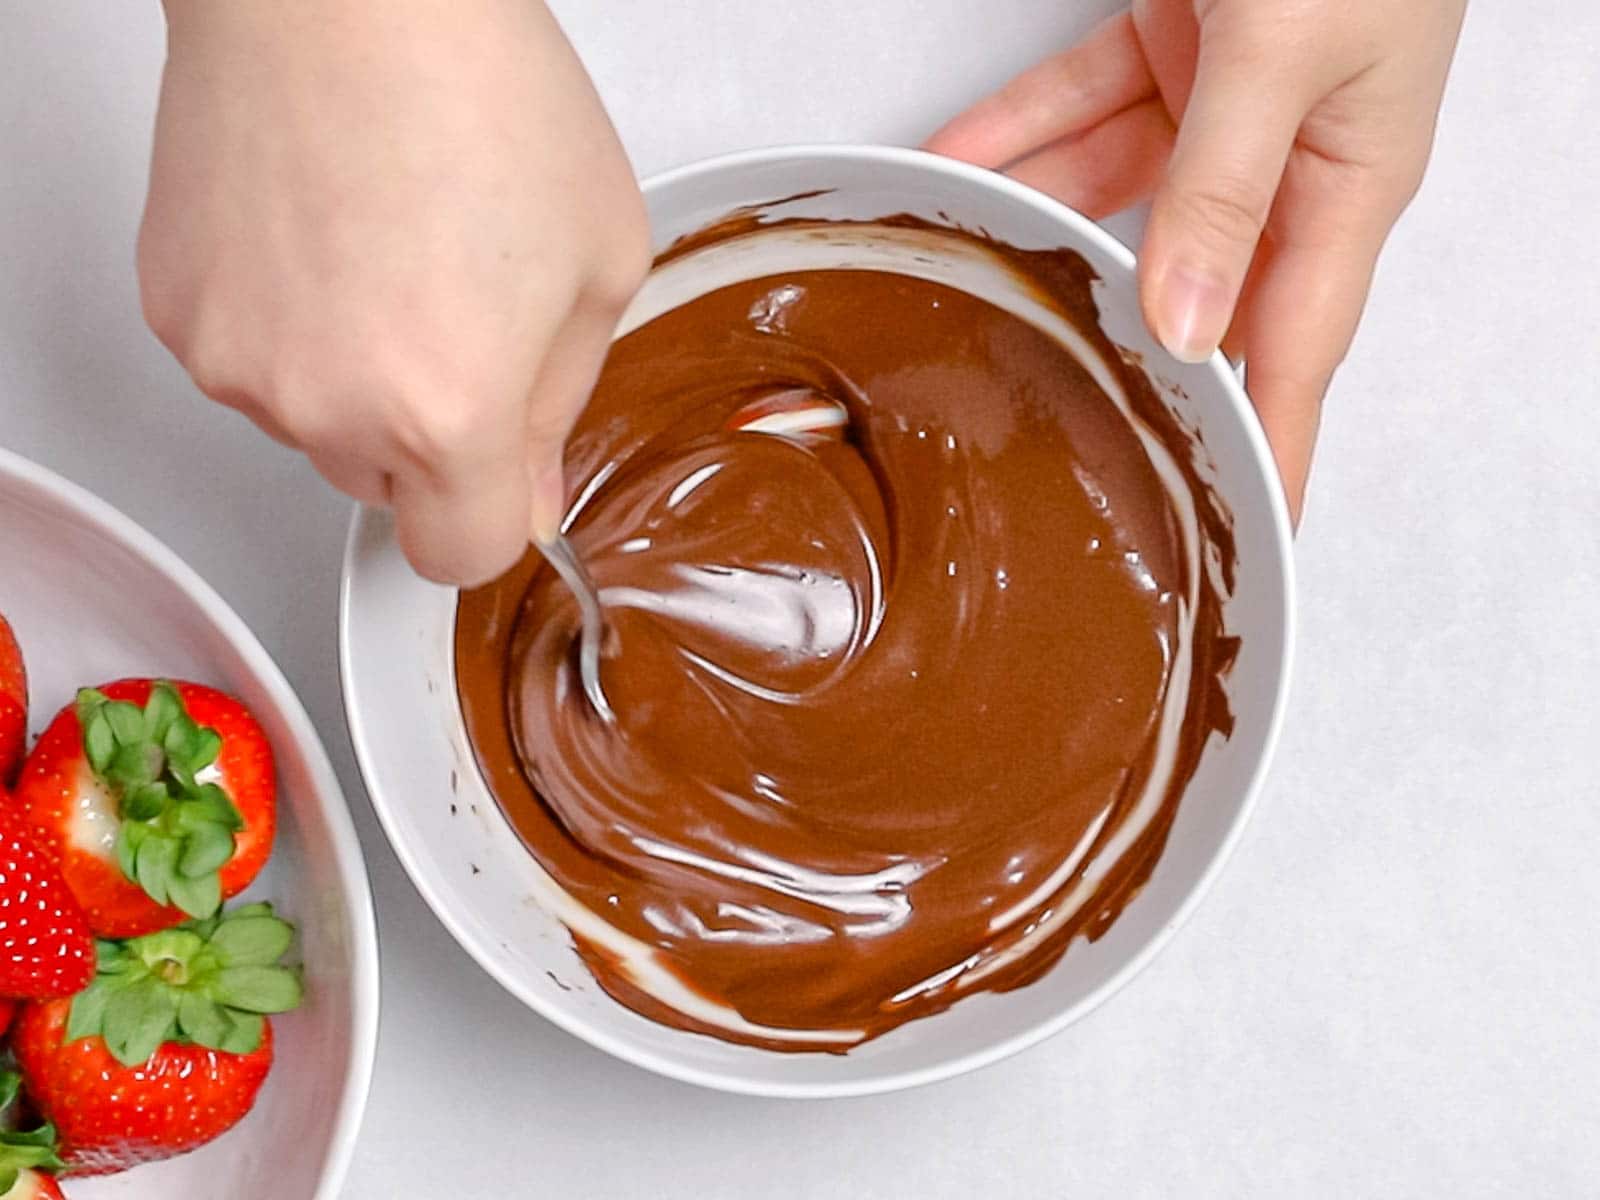 melted dark chocolate being stirred by a spoon in a white bowl next to a bowl of strawberries